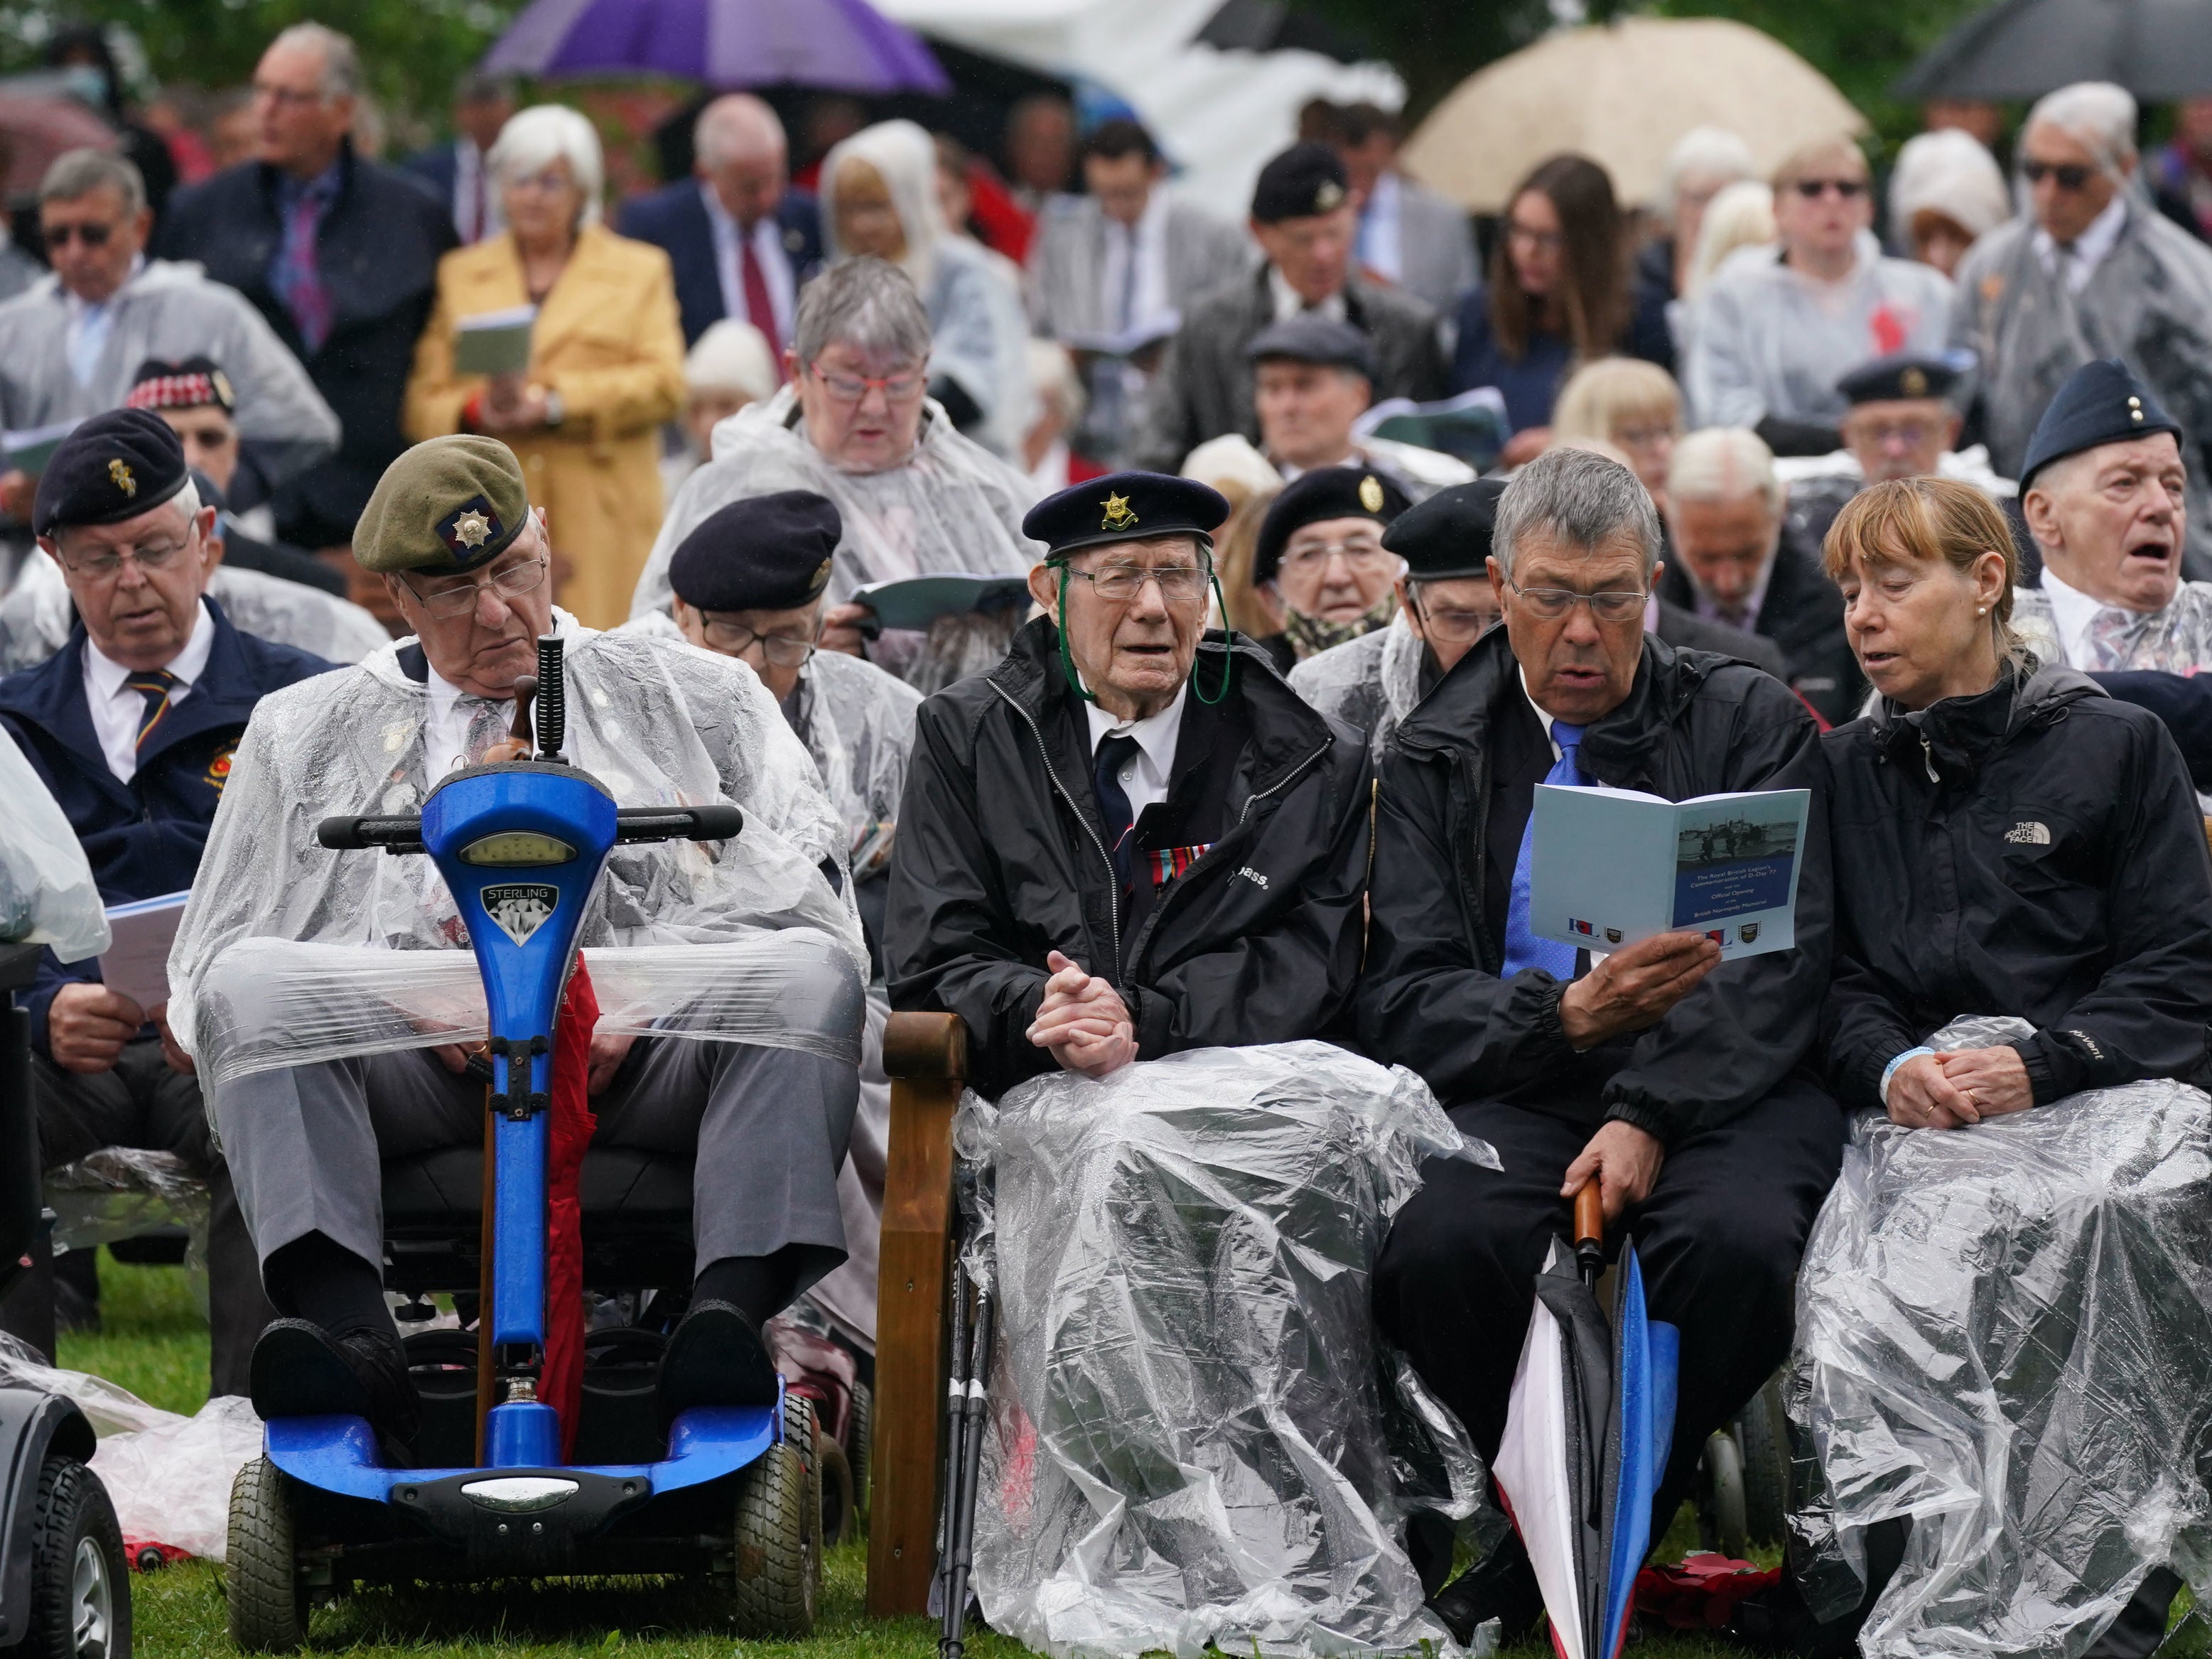 Veterans watch the official opening of the British Normandy Memorial in France via a live feed during a ceremony at the National Memorial Arboretum in Alrewas, Staffordshire